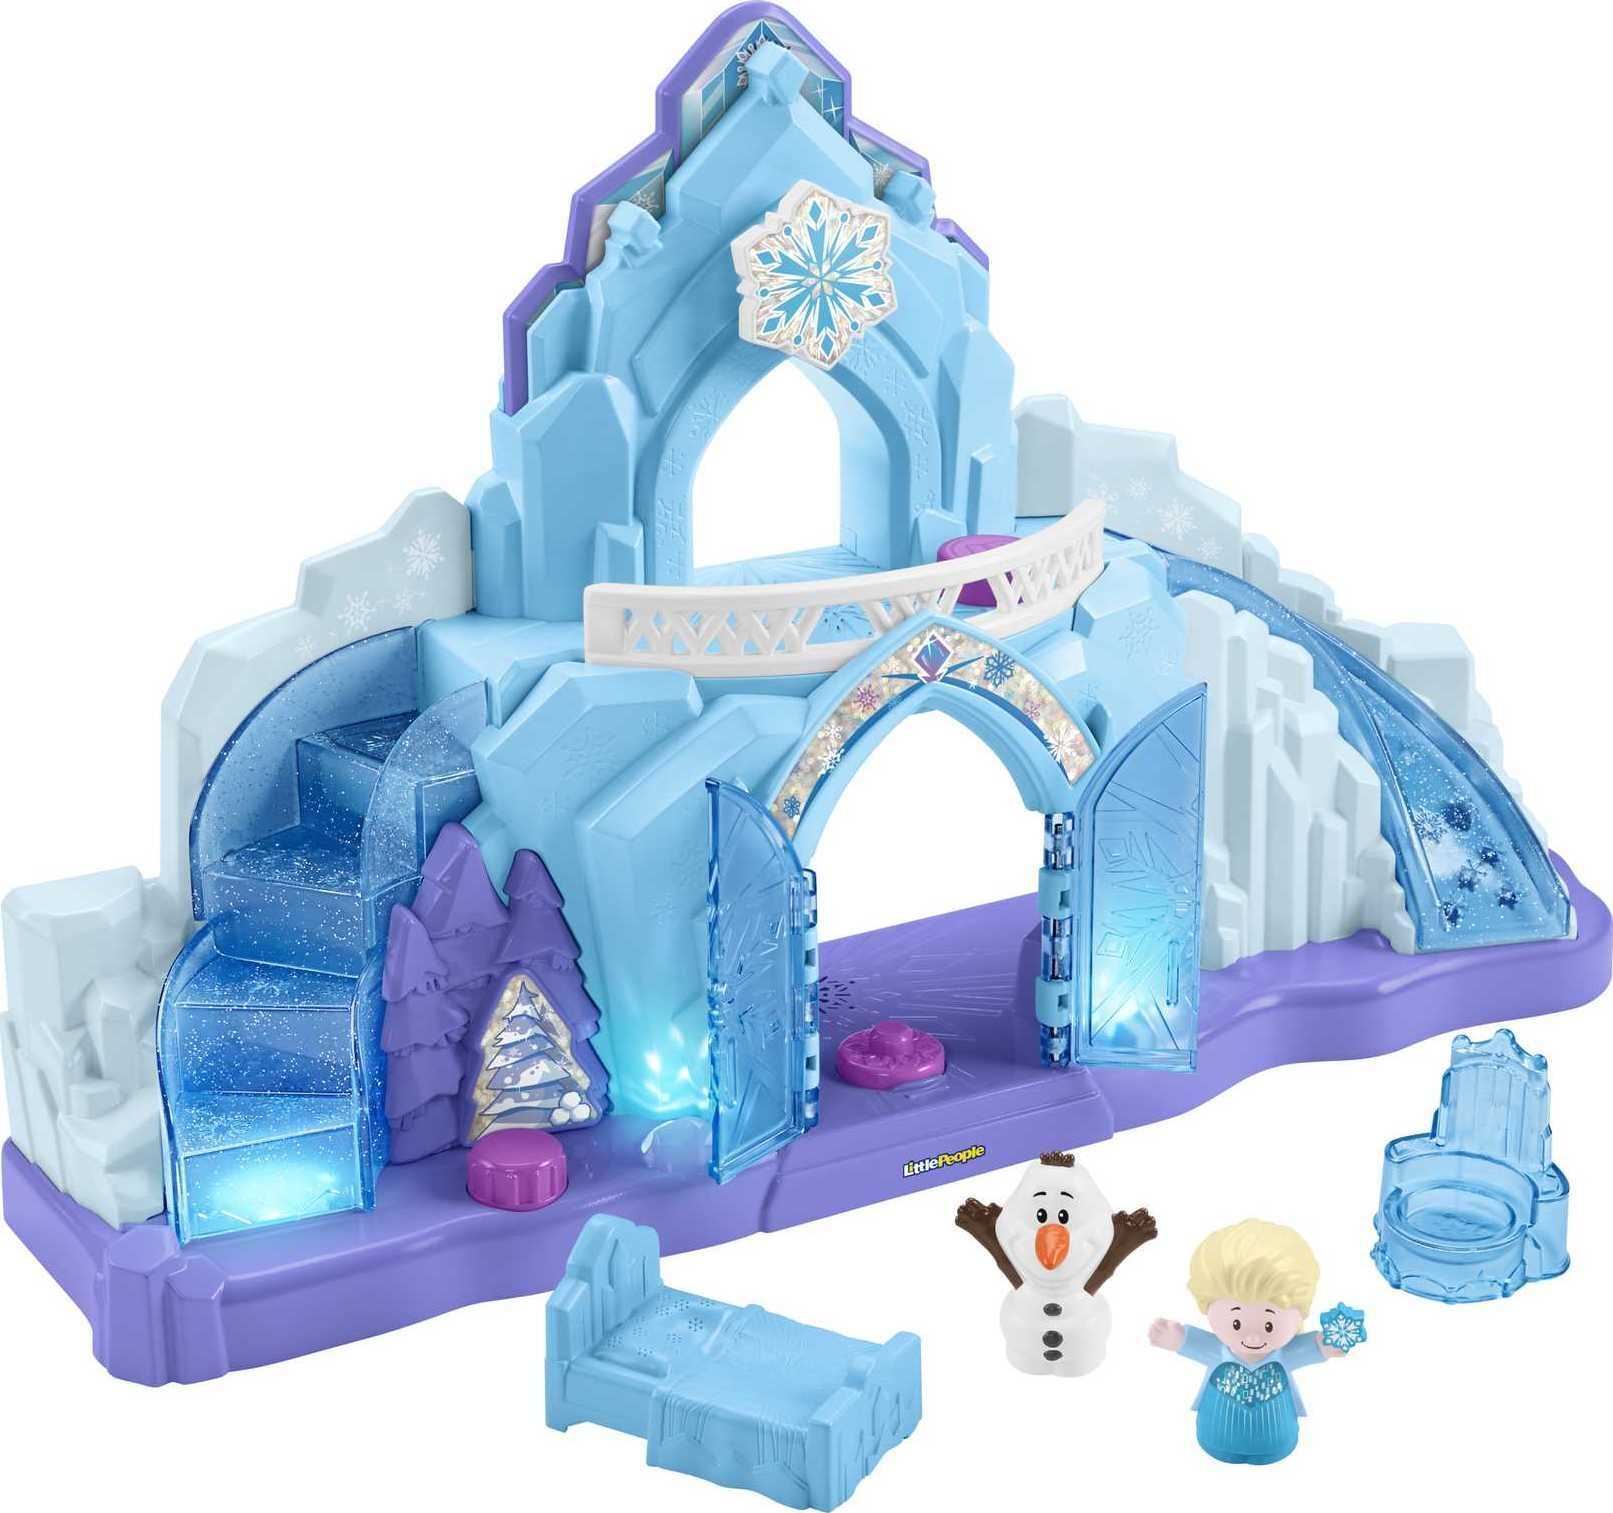 Disney Frozen Elsa’s Ice Palace Little People Toddler Musical Playset with Elsa & Olaf Figures - image 1 of 7